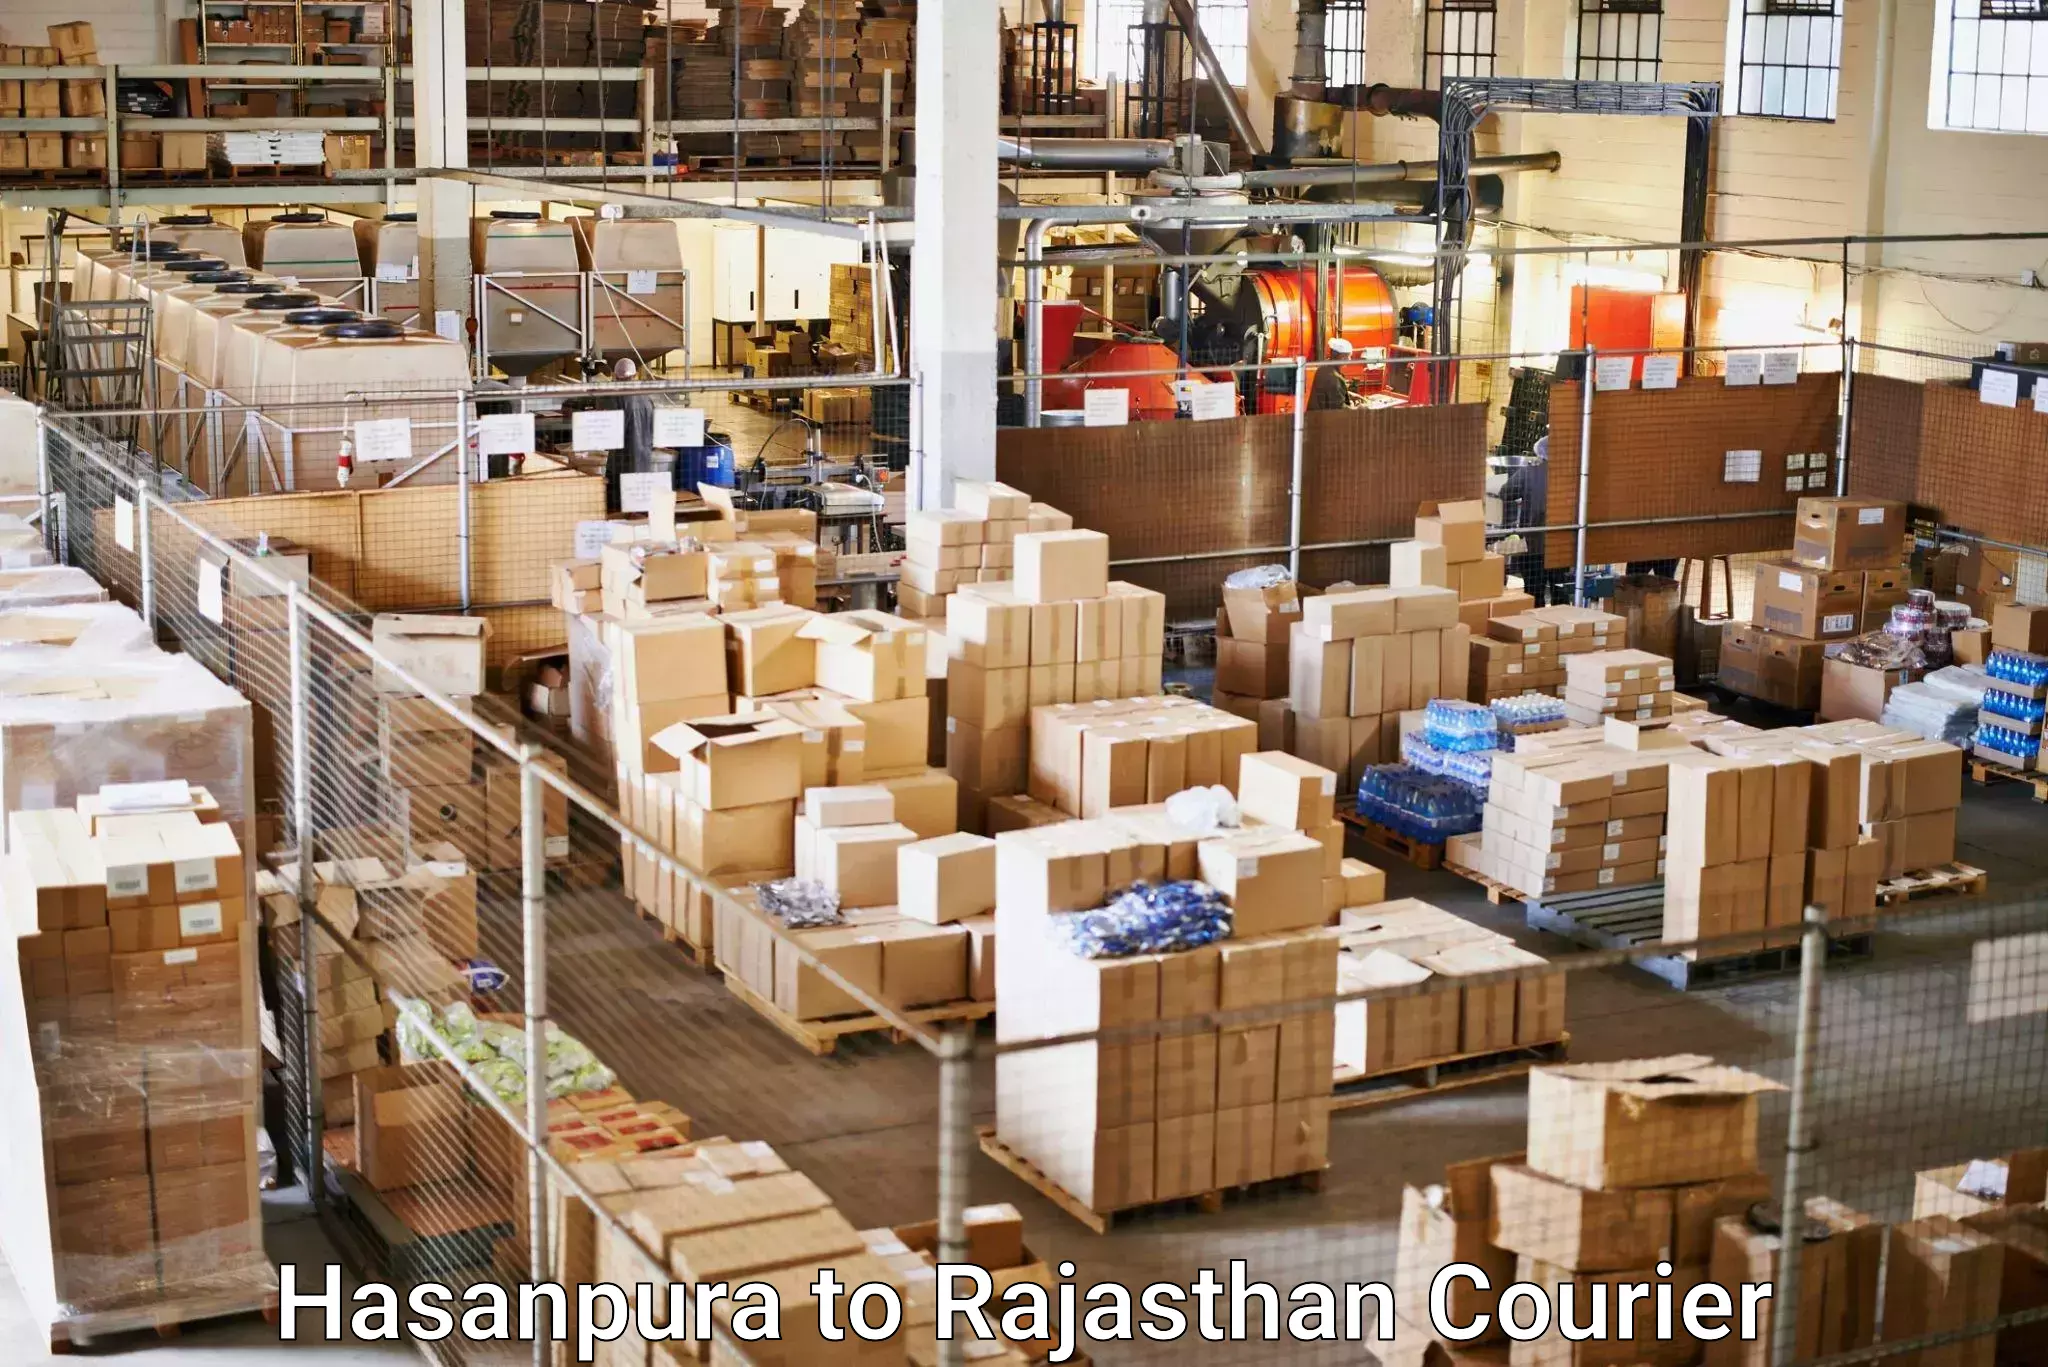 24-hour delivery options Hasanpura to Rajgarh Rajasthan